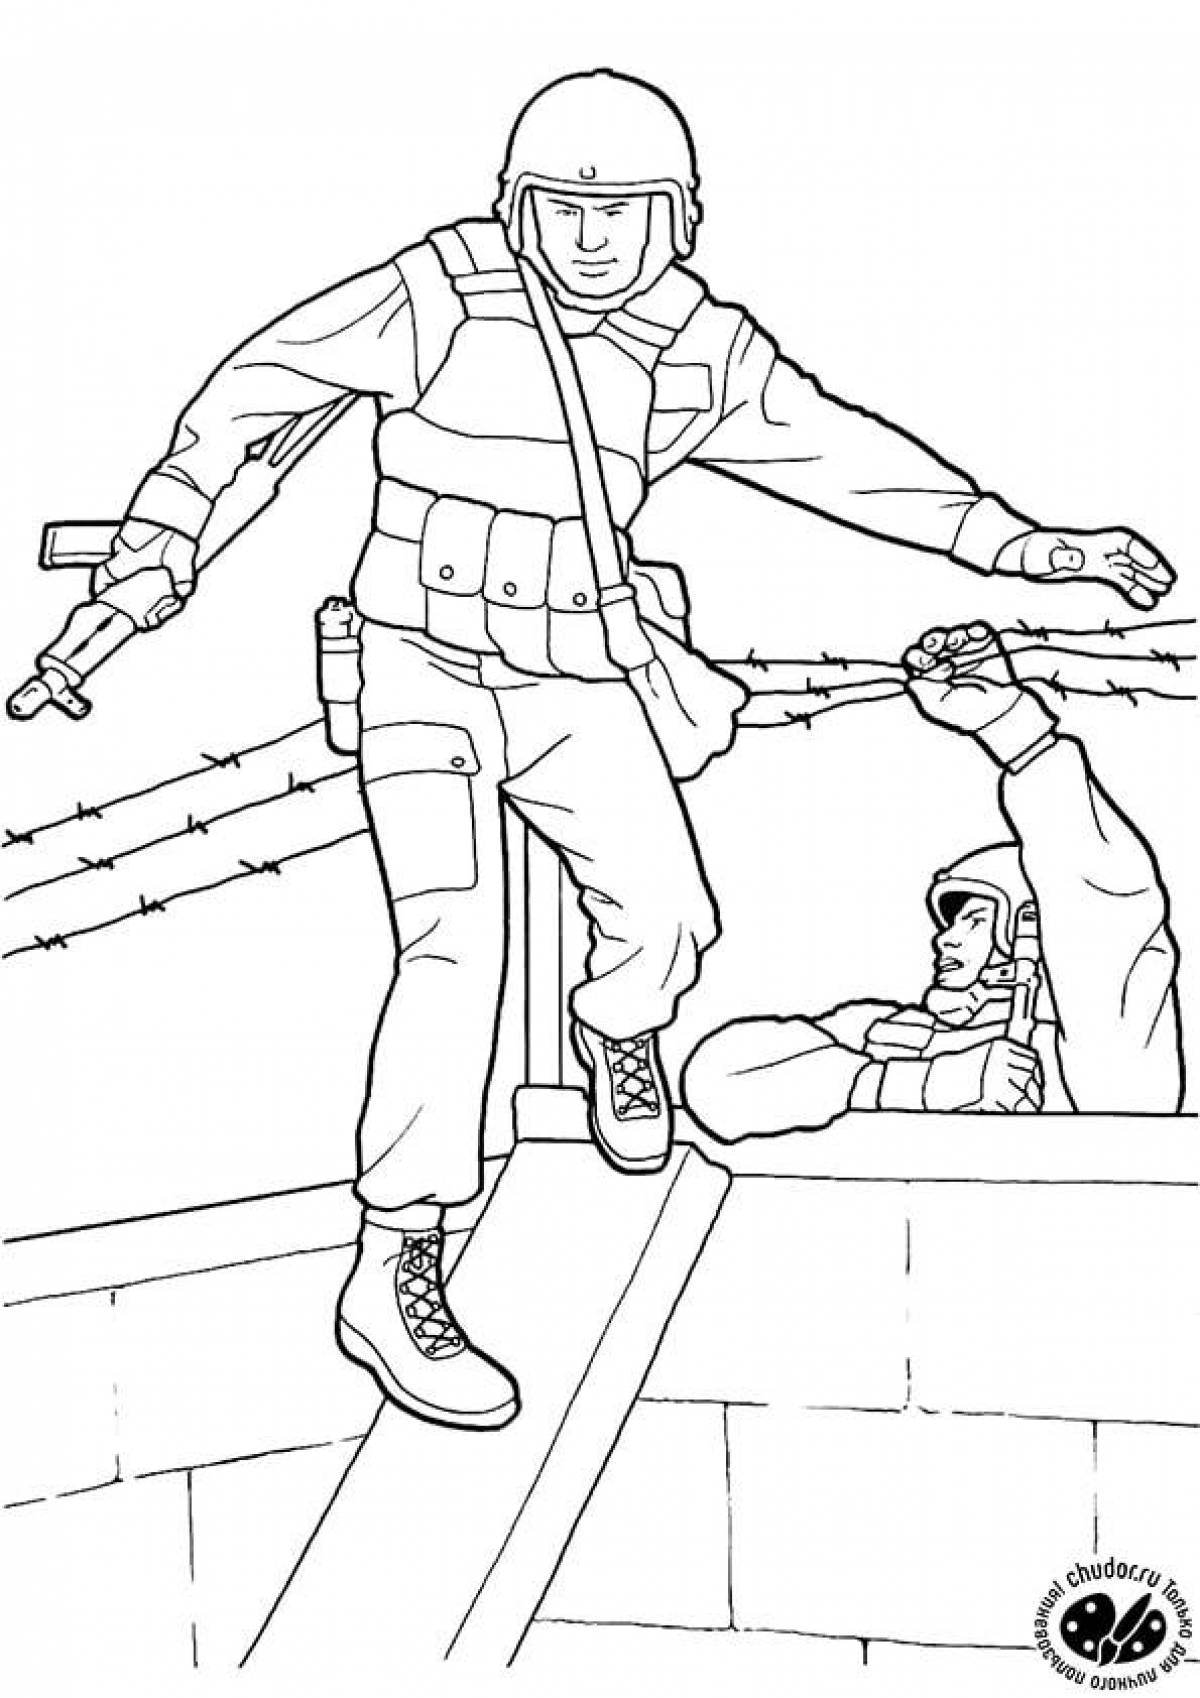 Special forces bright coloring page